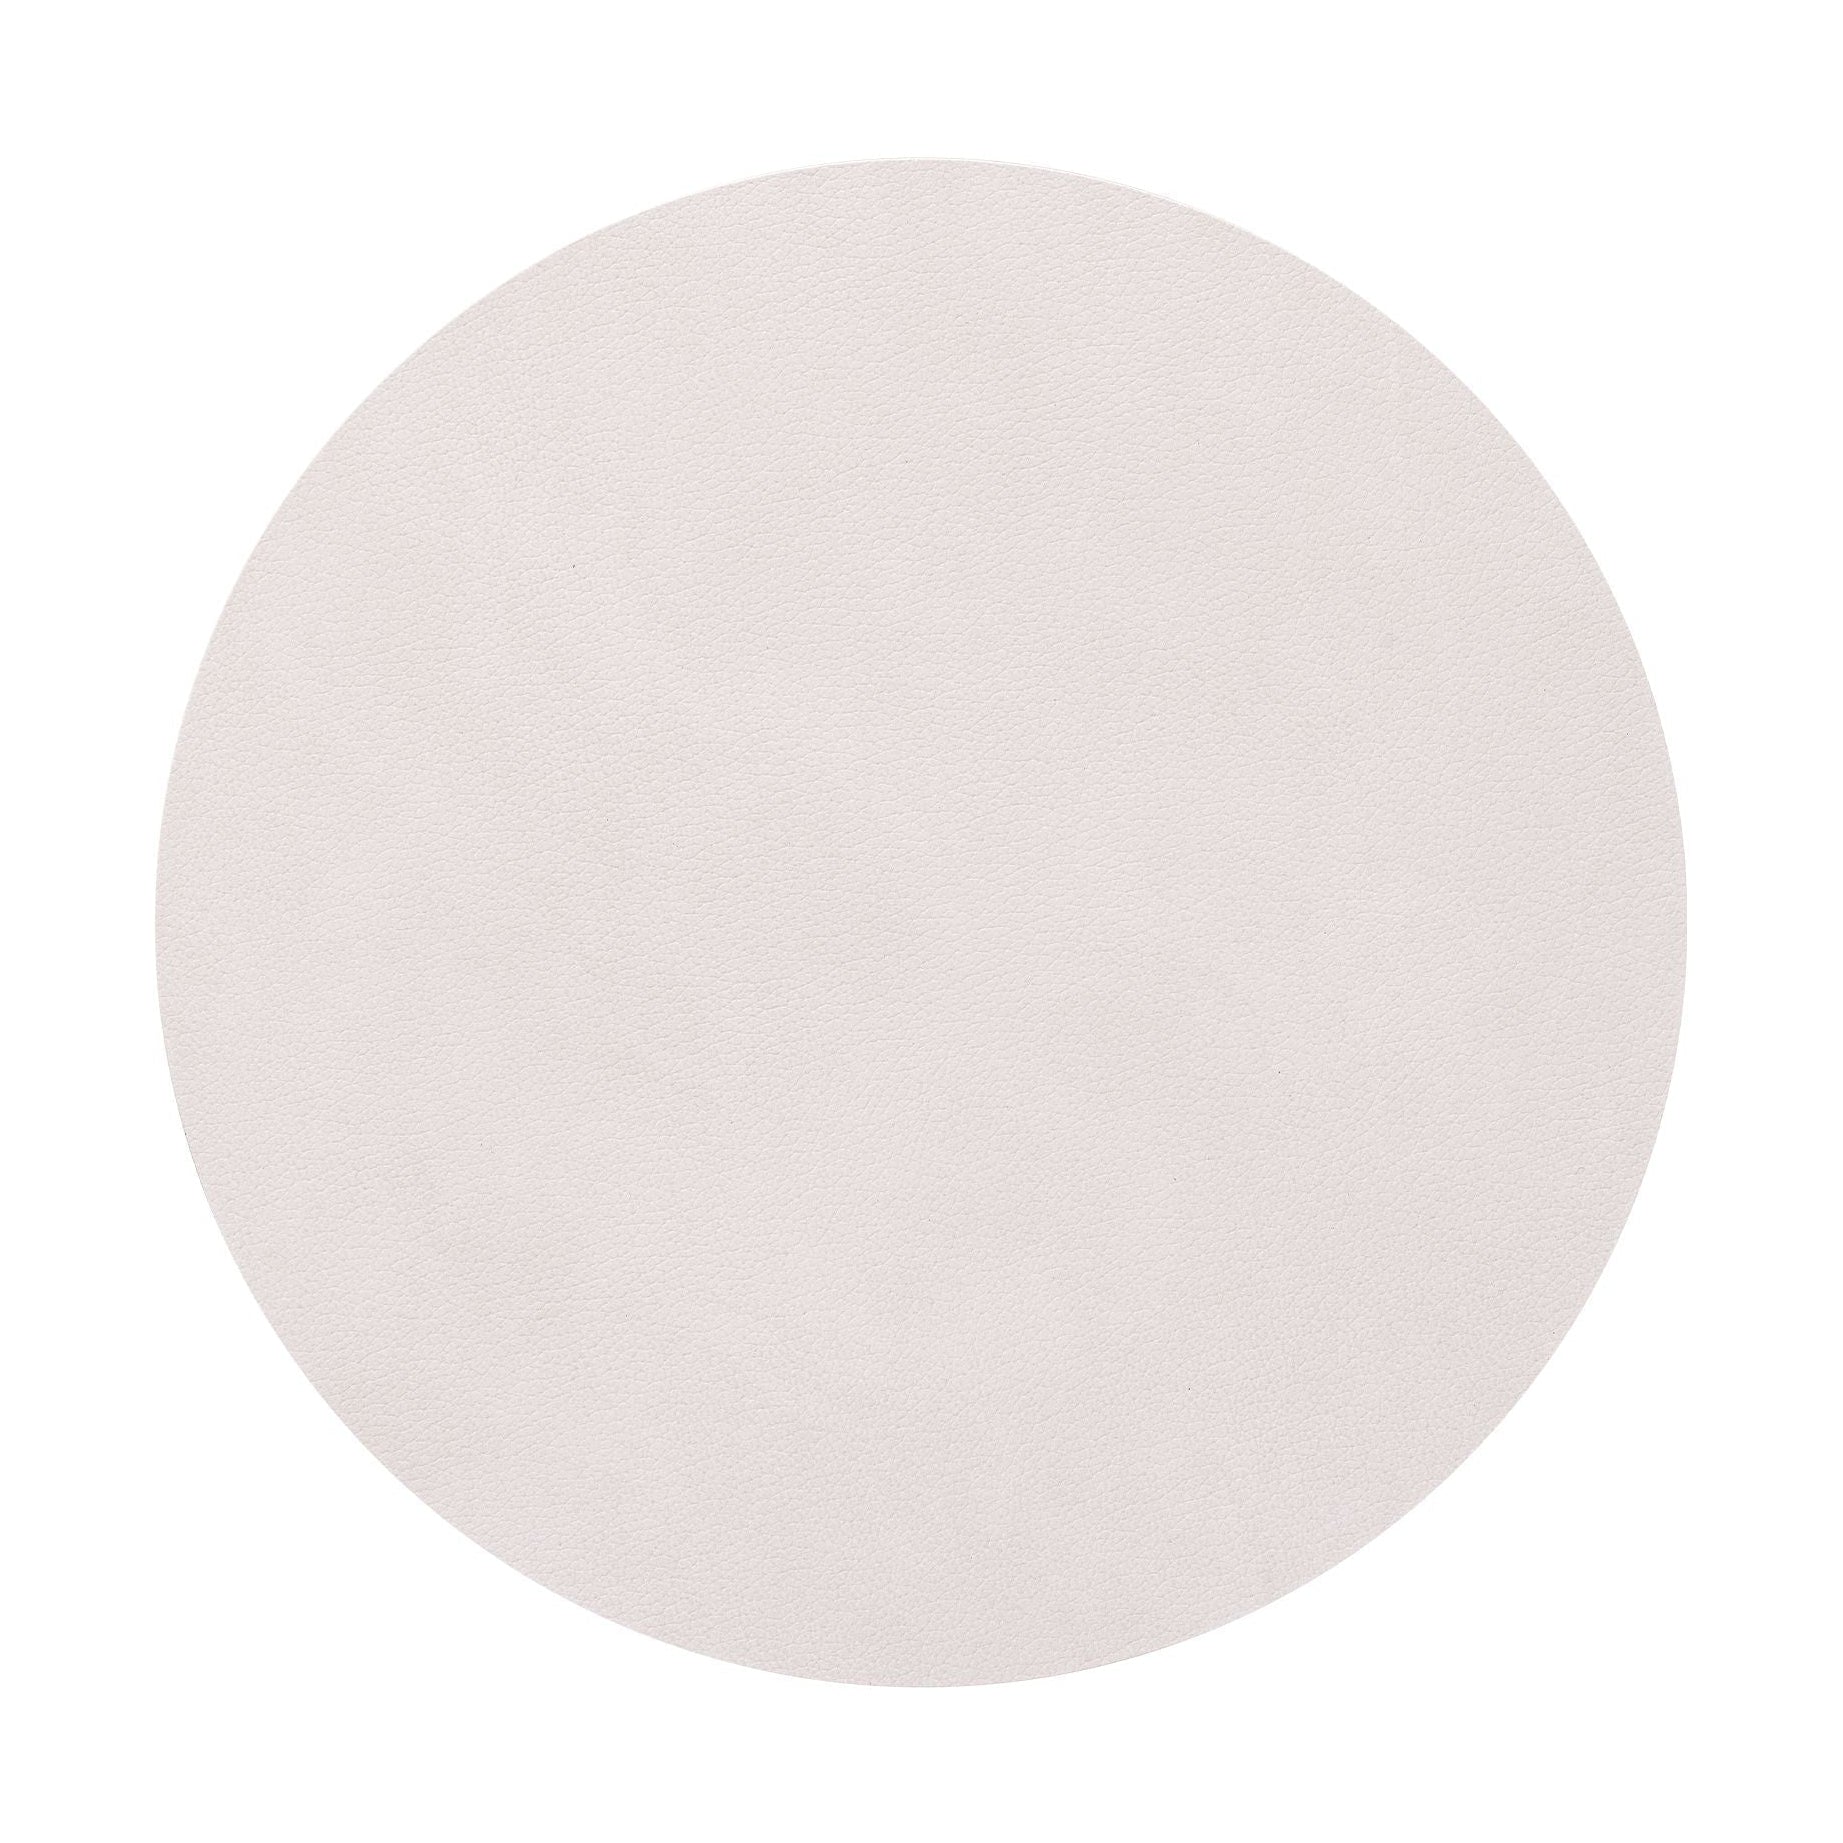 Lind ADN Table Mat Circle S, Oyster White